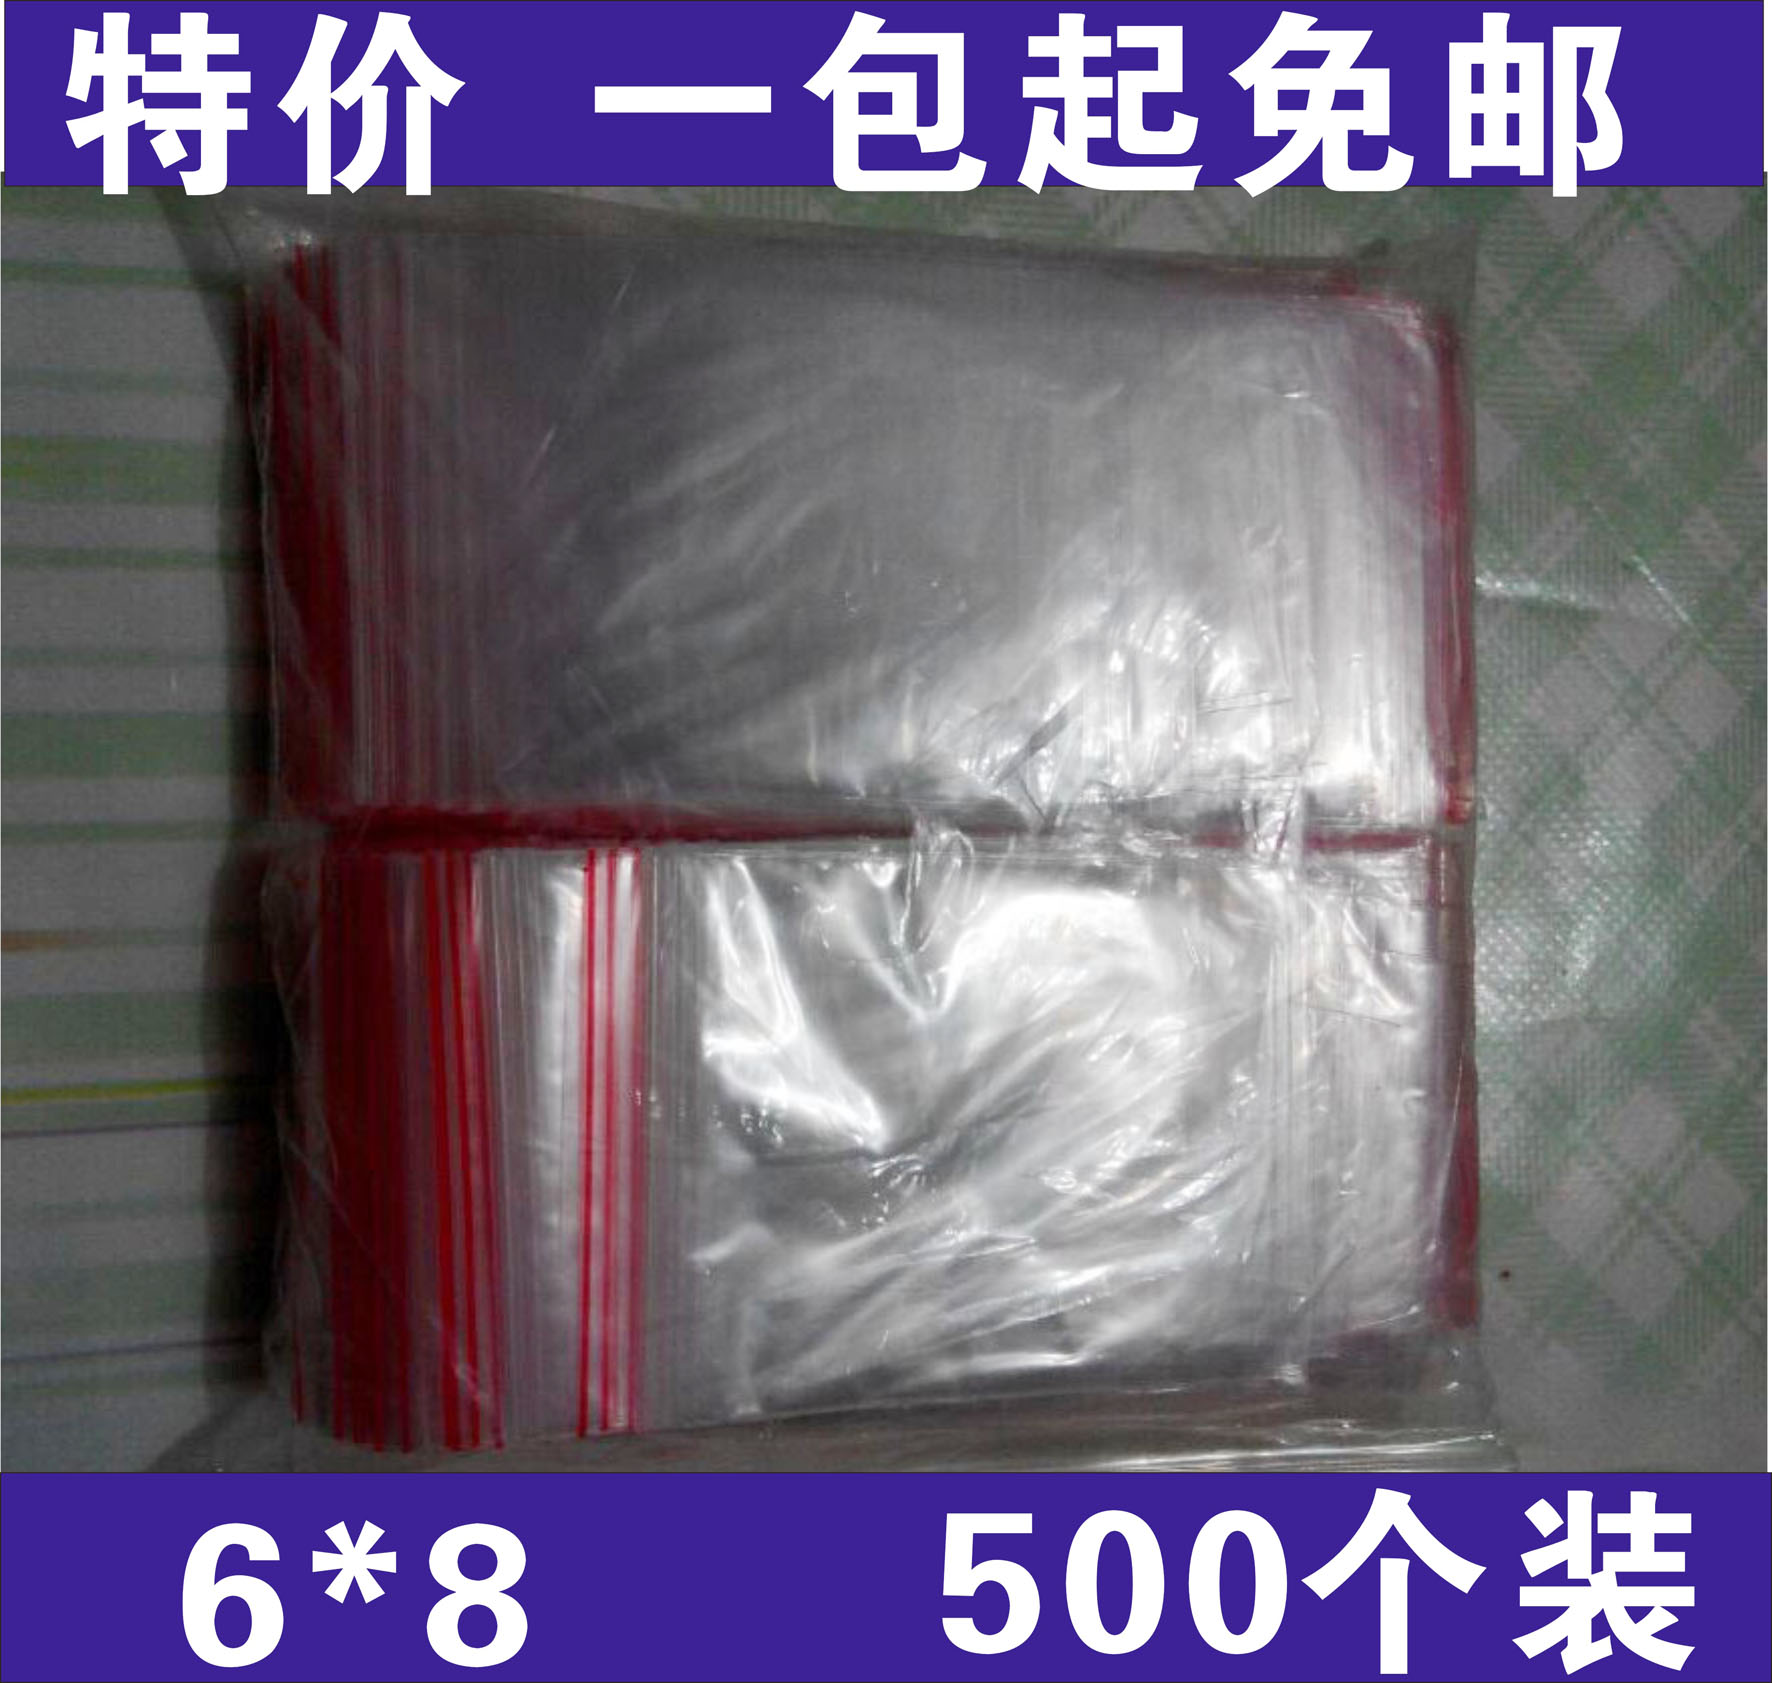 Double layer 5 wire plastic clip chain self-sealing bag New material small jewelry sealed transparent bag 6*8 500pcs